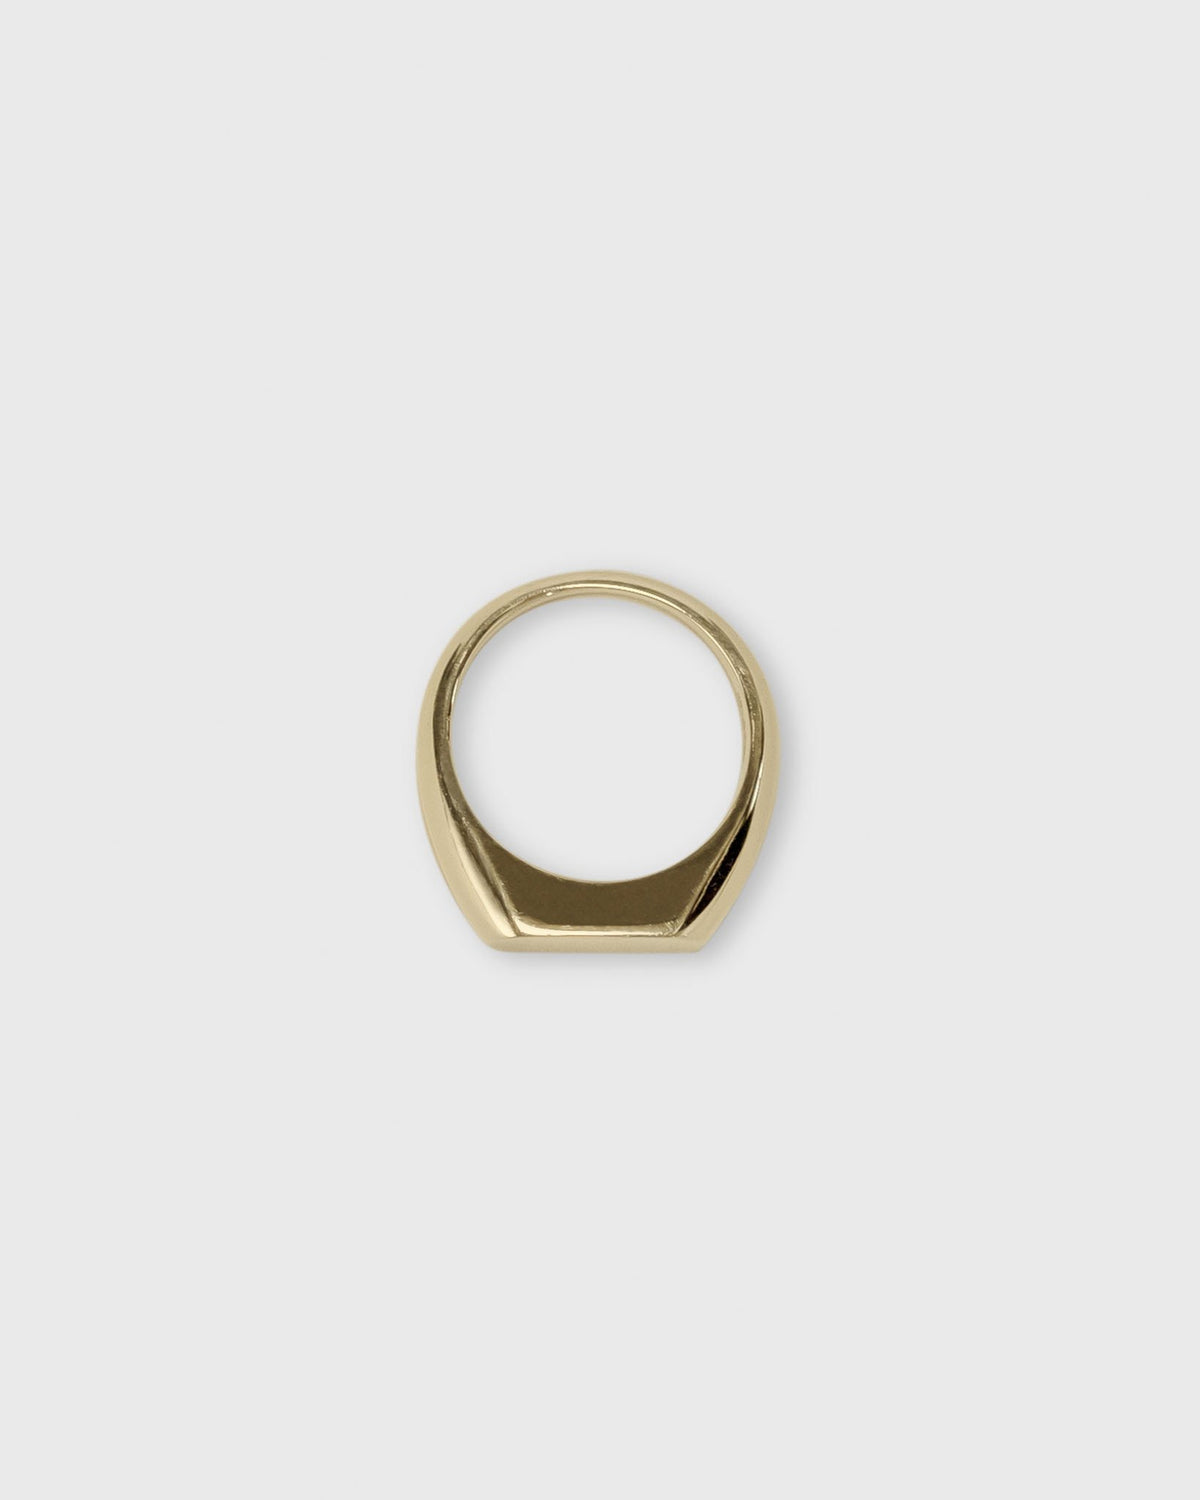 top view of cushion signet ring in solid 14k yellow gold